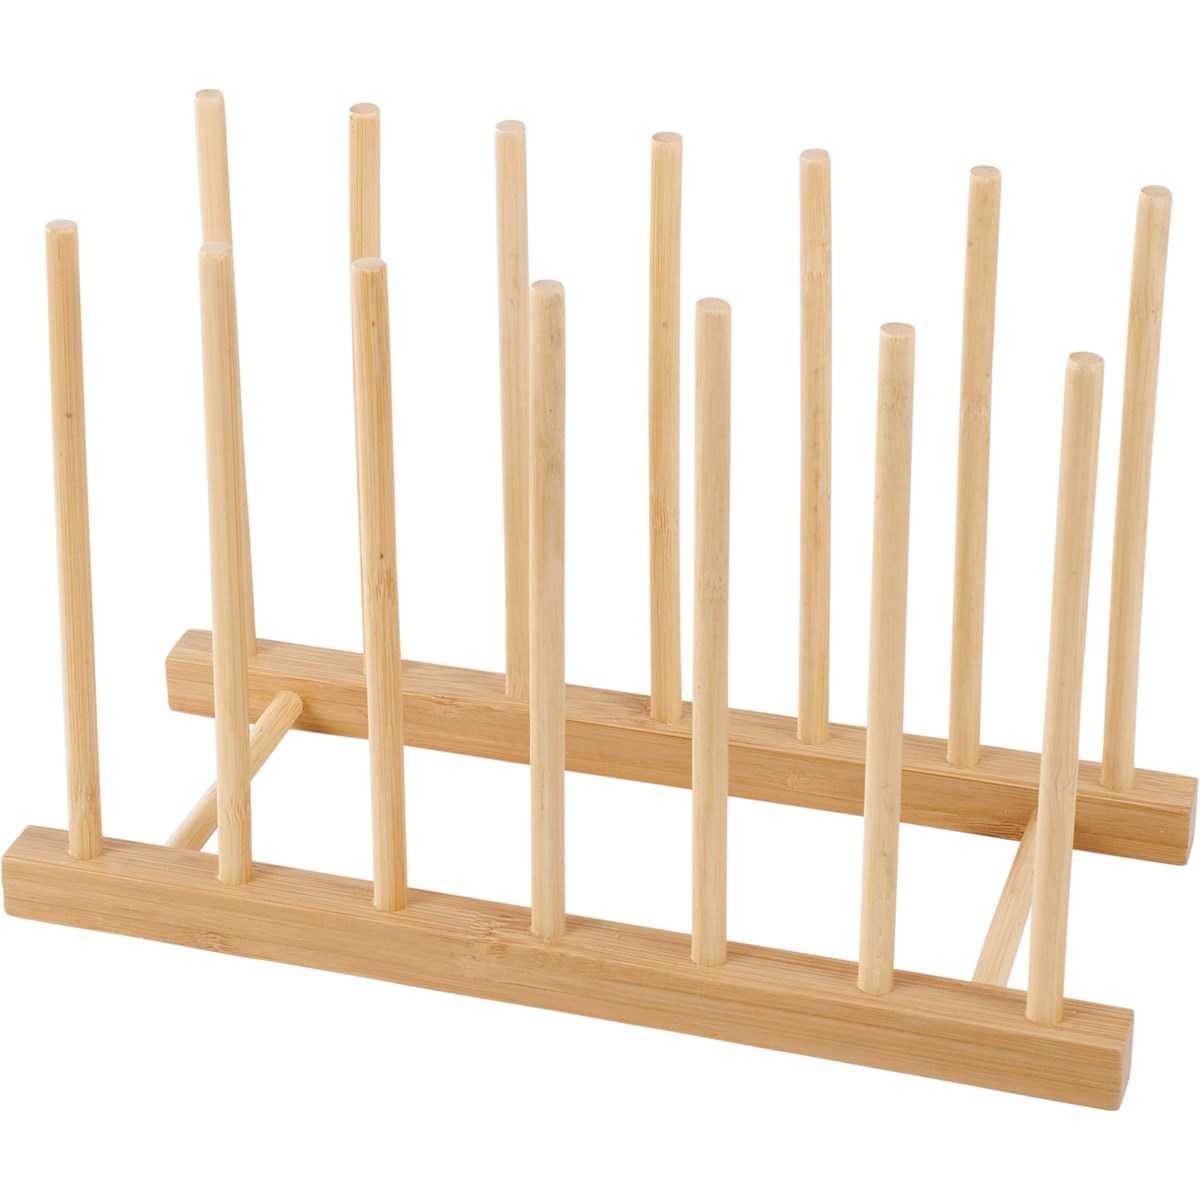 Paper Placemats Display Rack - Wood